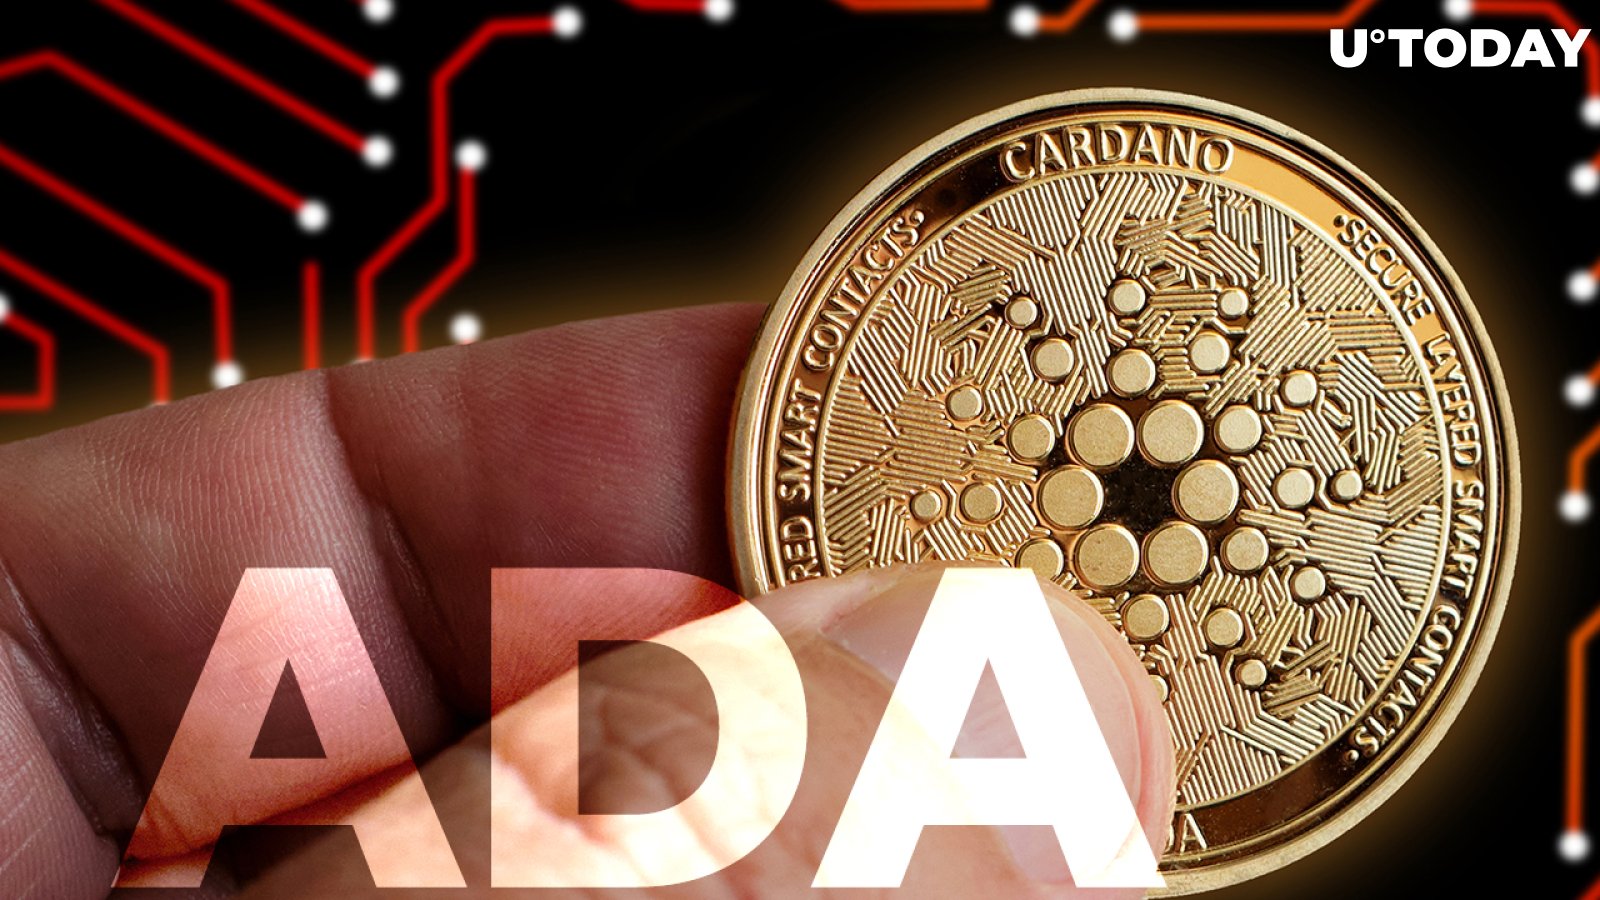 "Where Did the ADA Go?" Cardano's Founder Reacts to User's Allegation of Loss Worth Over 7,000 Euros